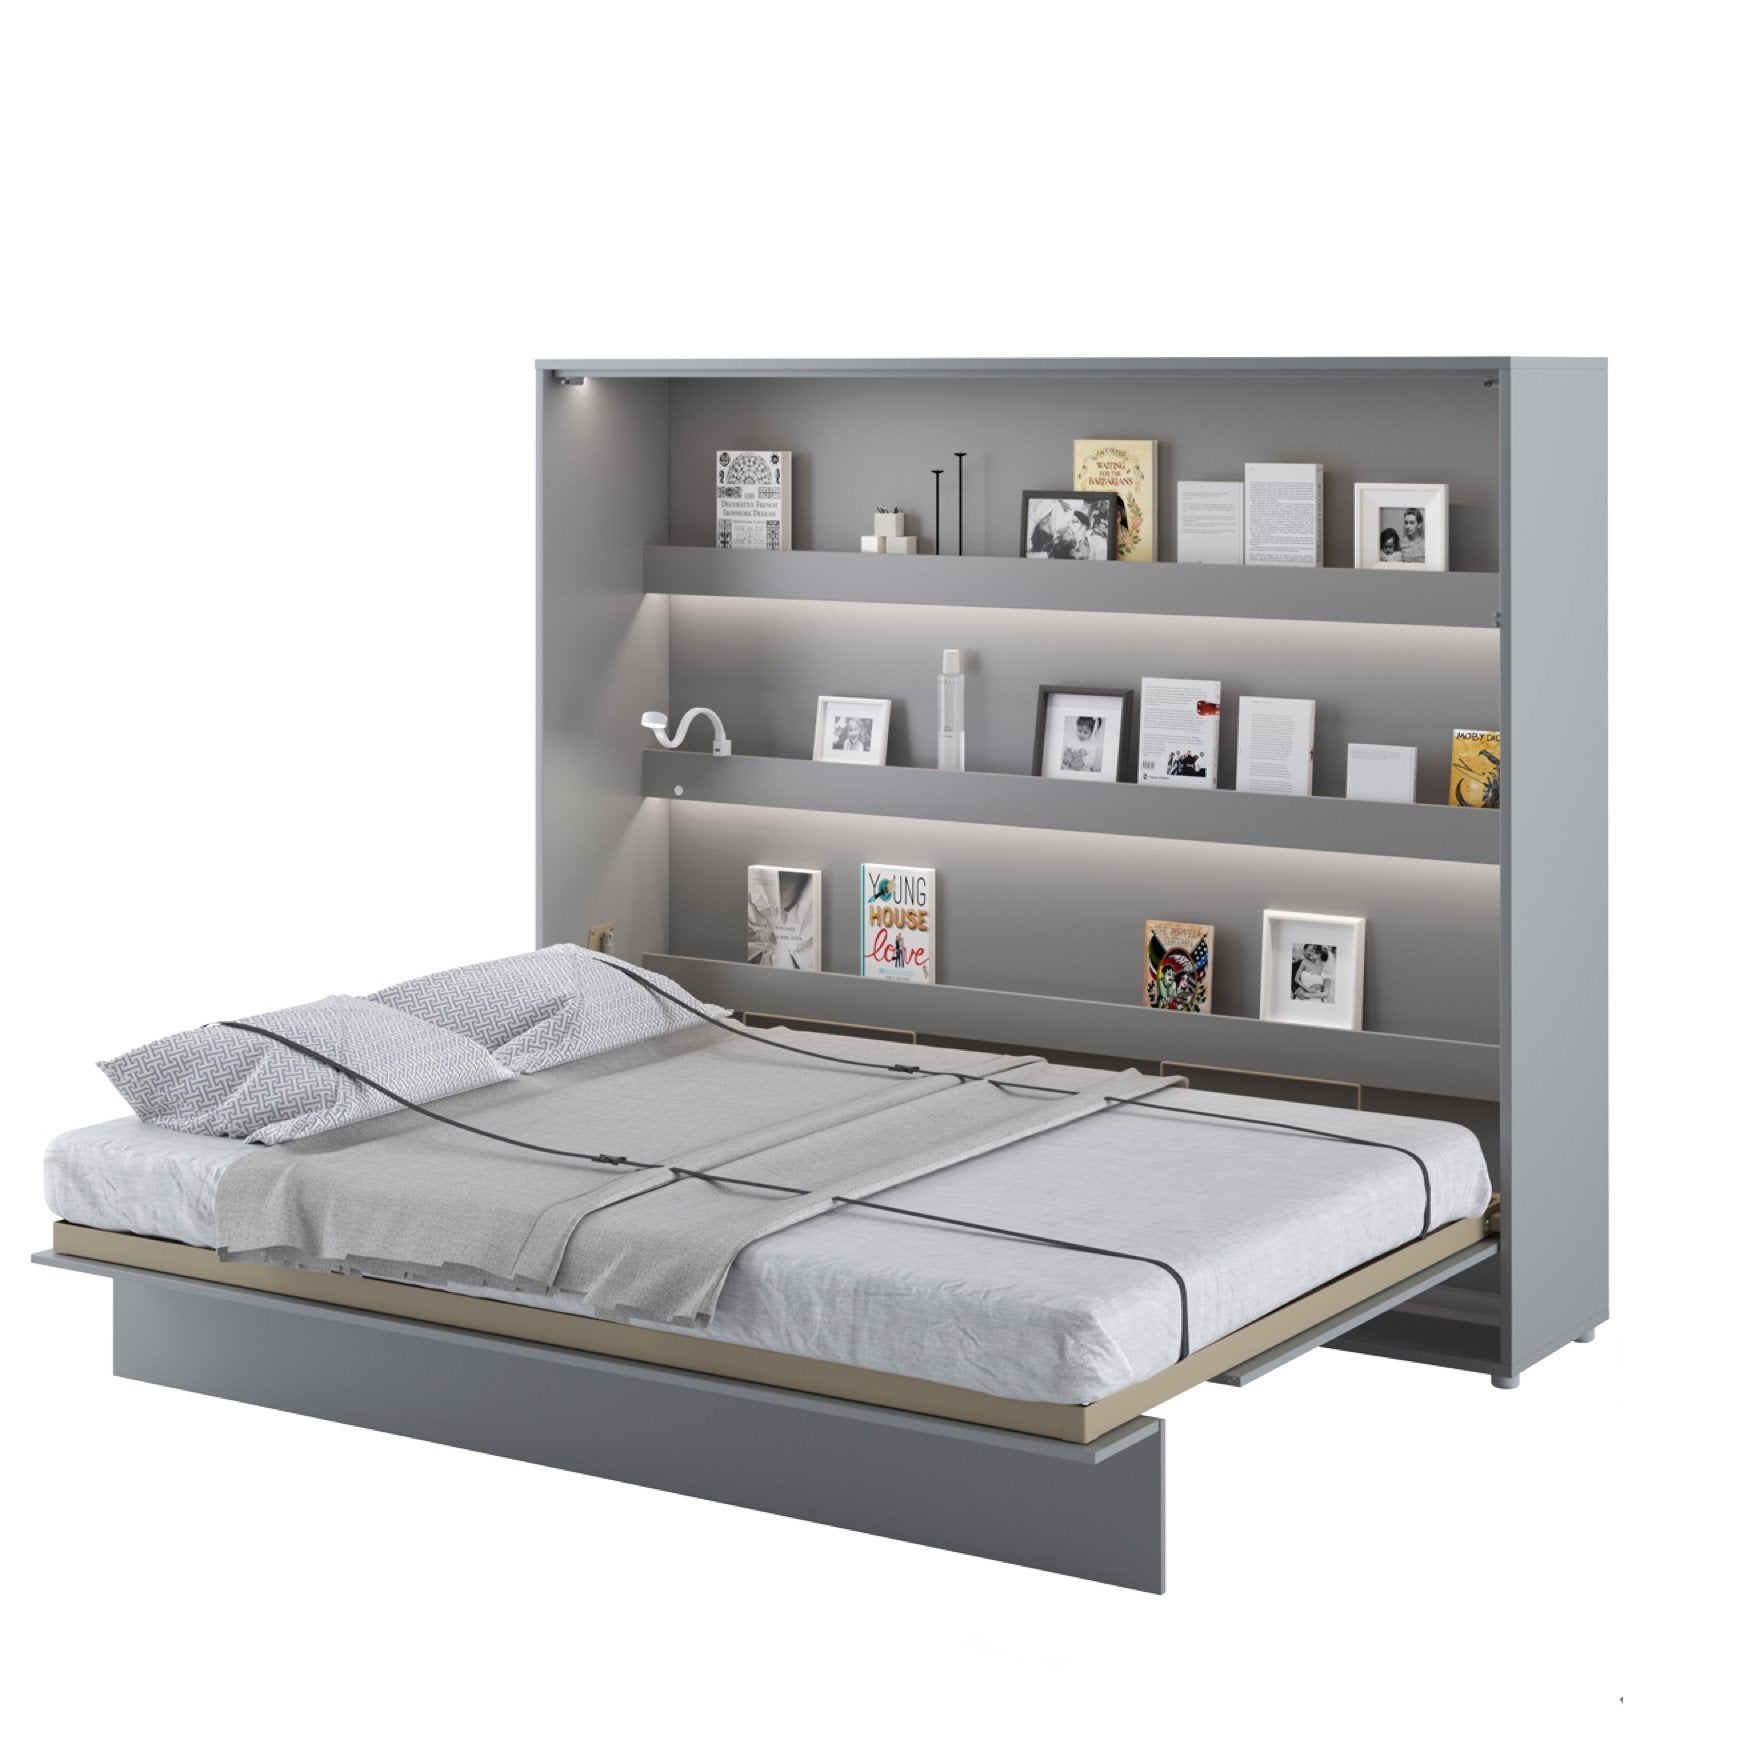 BC-14 Horizontal Wall Bed Concept 160cm - Furniture Gold